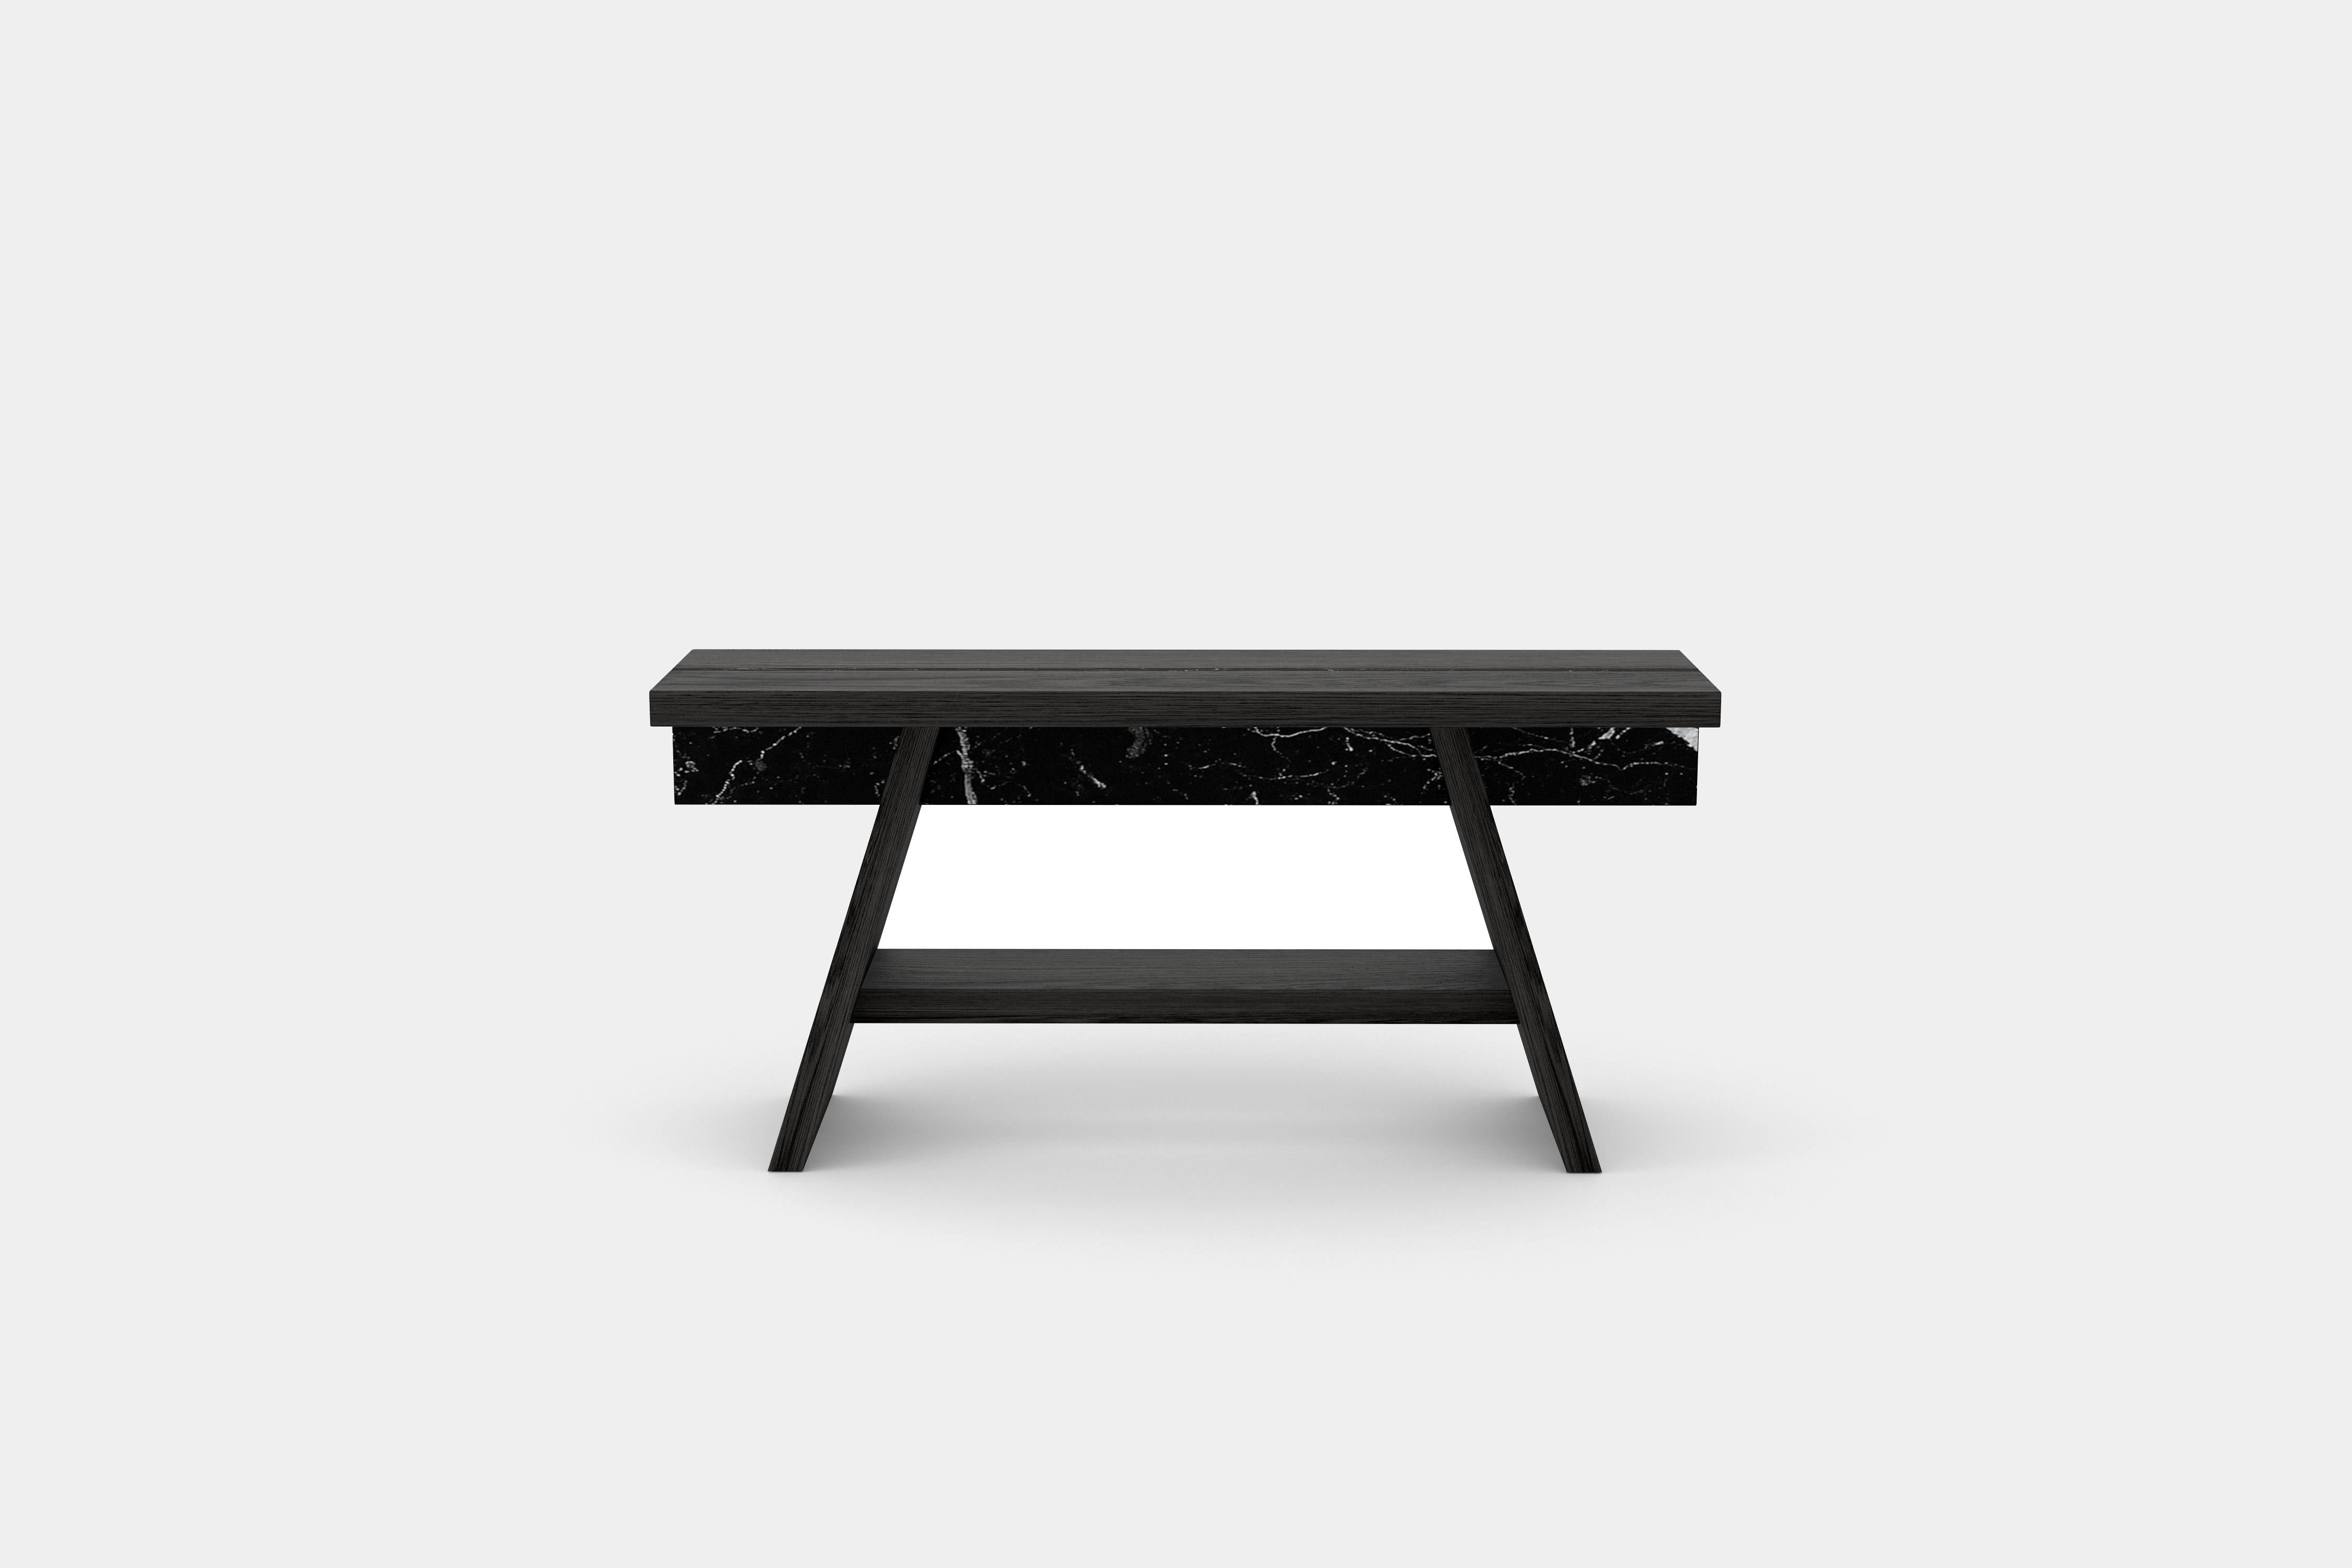 Mexican Laws of Motion Sofa Back in Solid Black Wood, Console Table by Joel Escalona